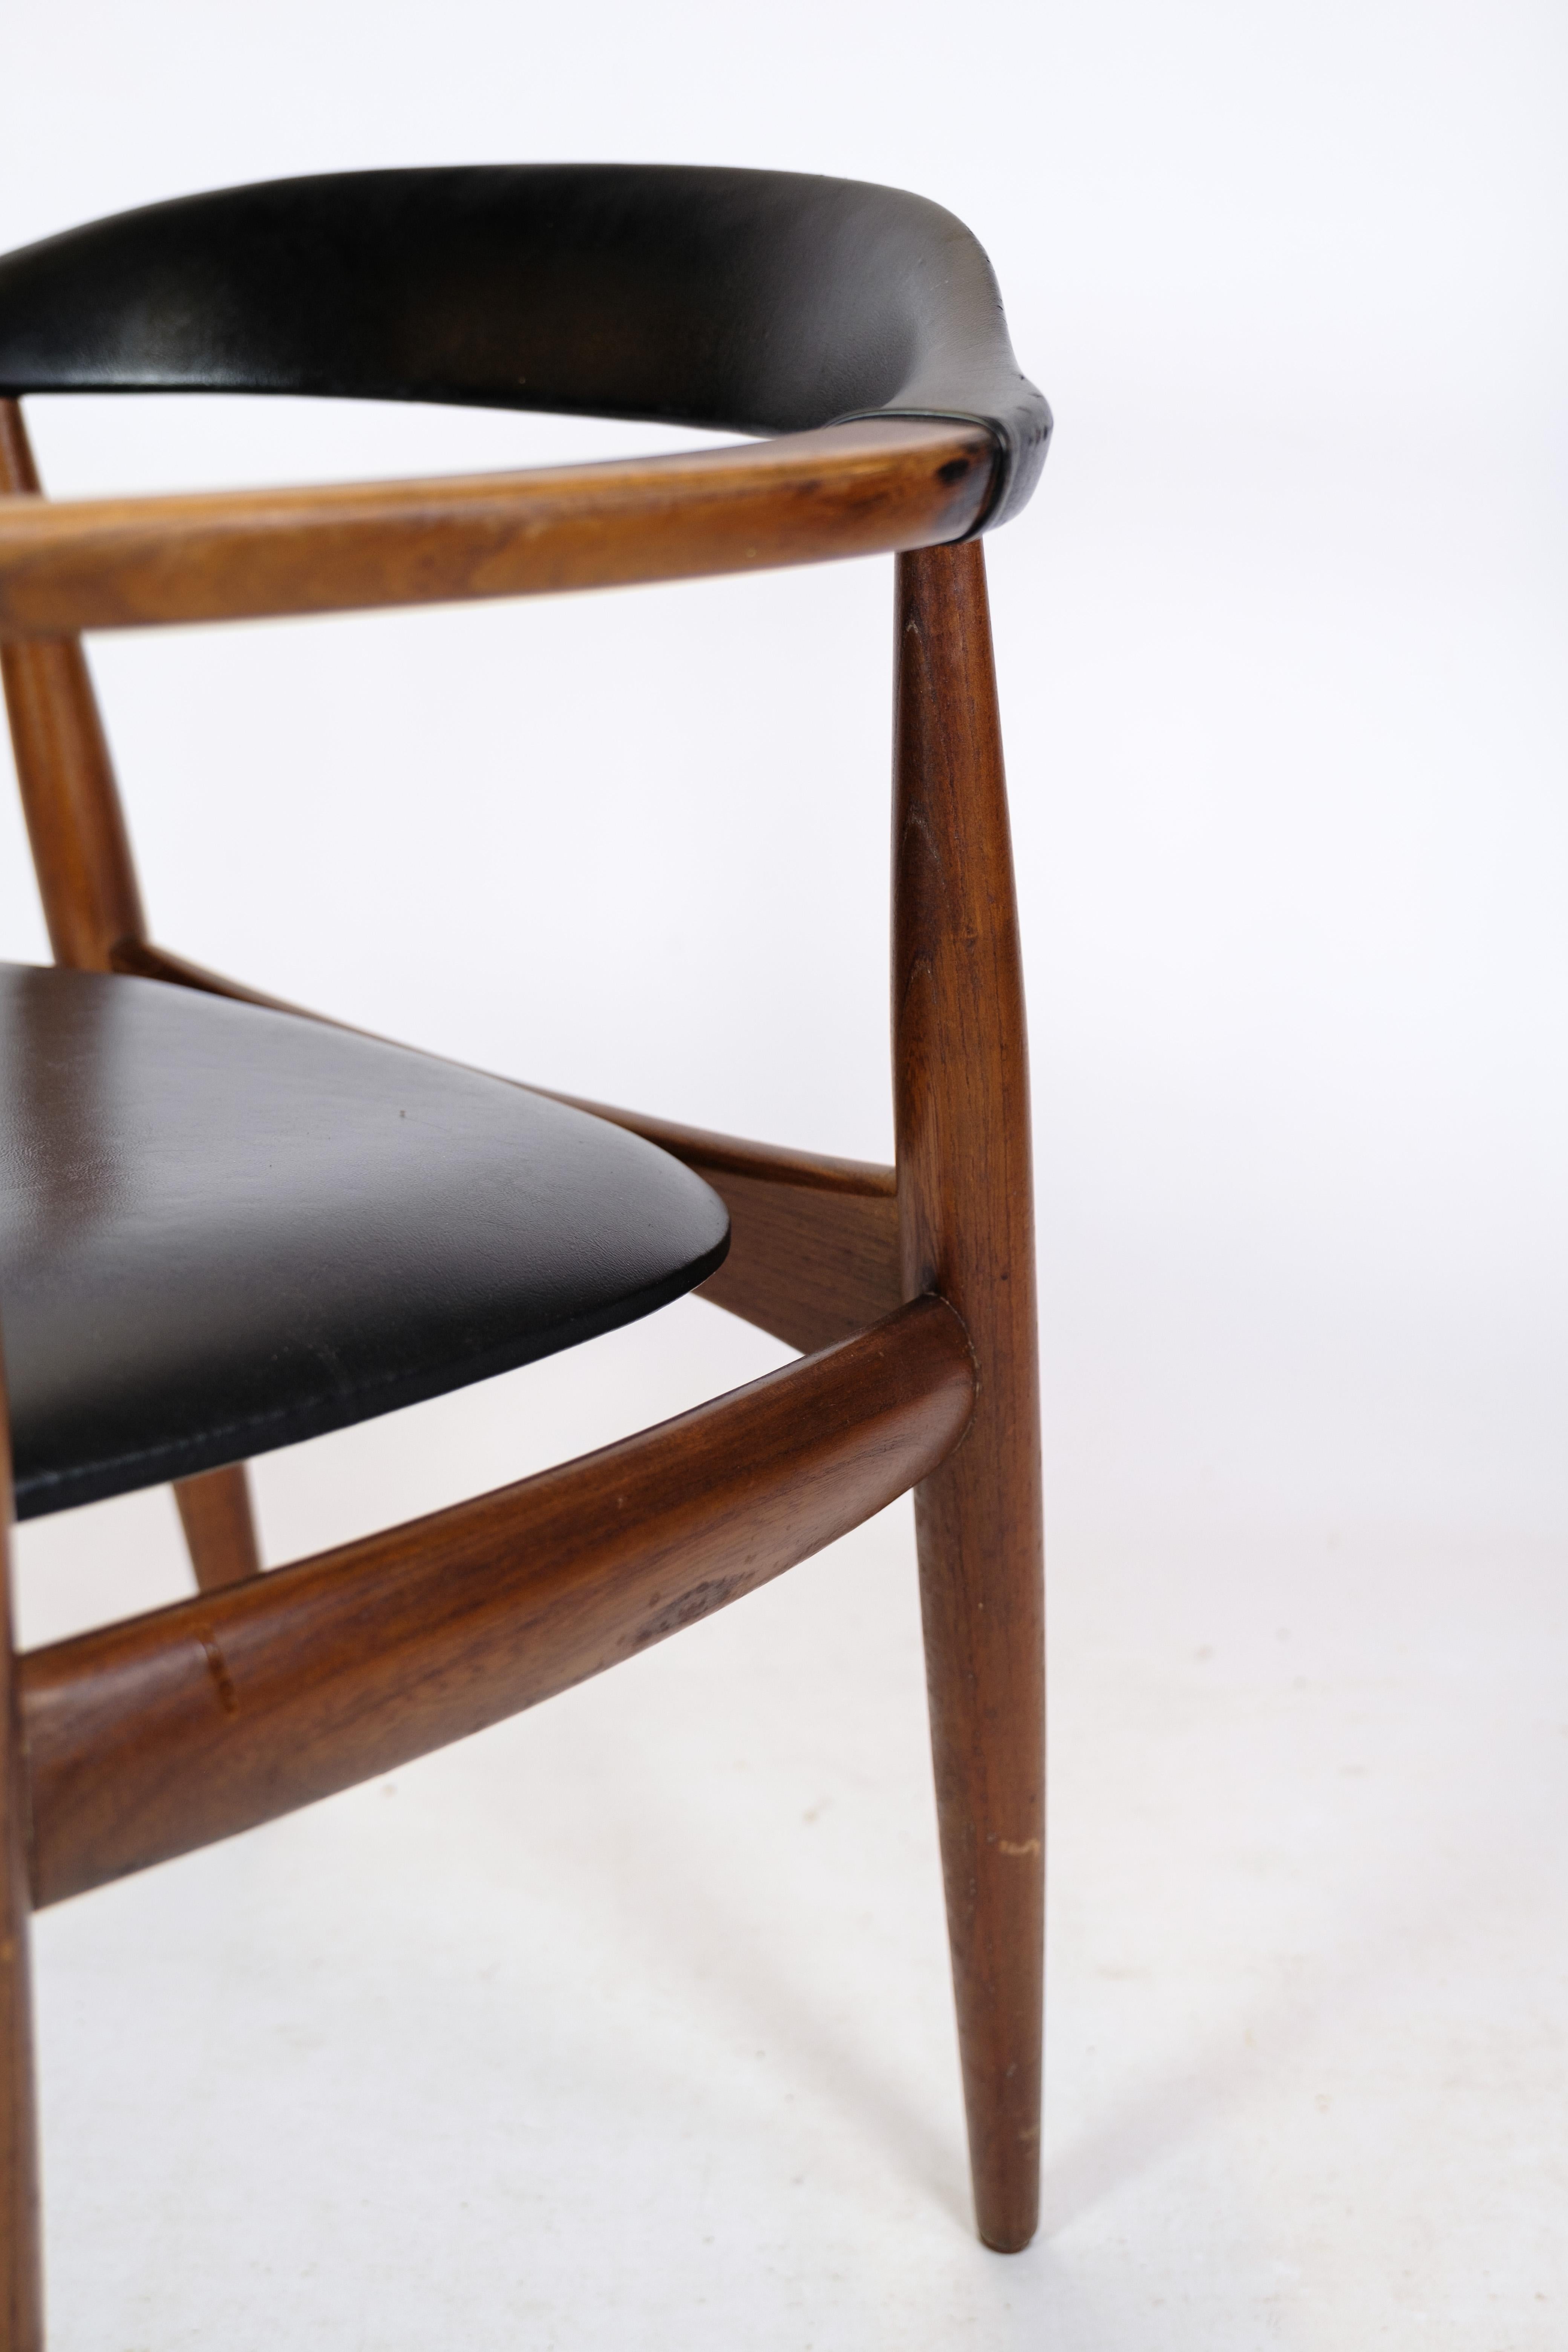 Armchair in teak wood and black artificial leather, designed by Illum Wikkelsø for Niels Eilersen from around the 1960s.
Measurements in cm: H:66 W:62 D:46 SH:45